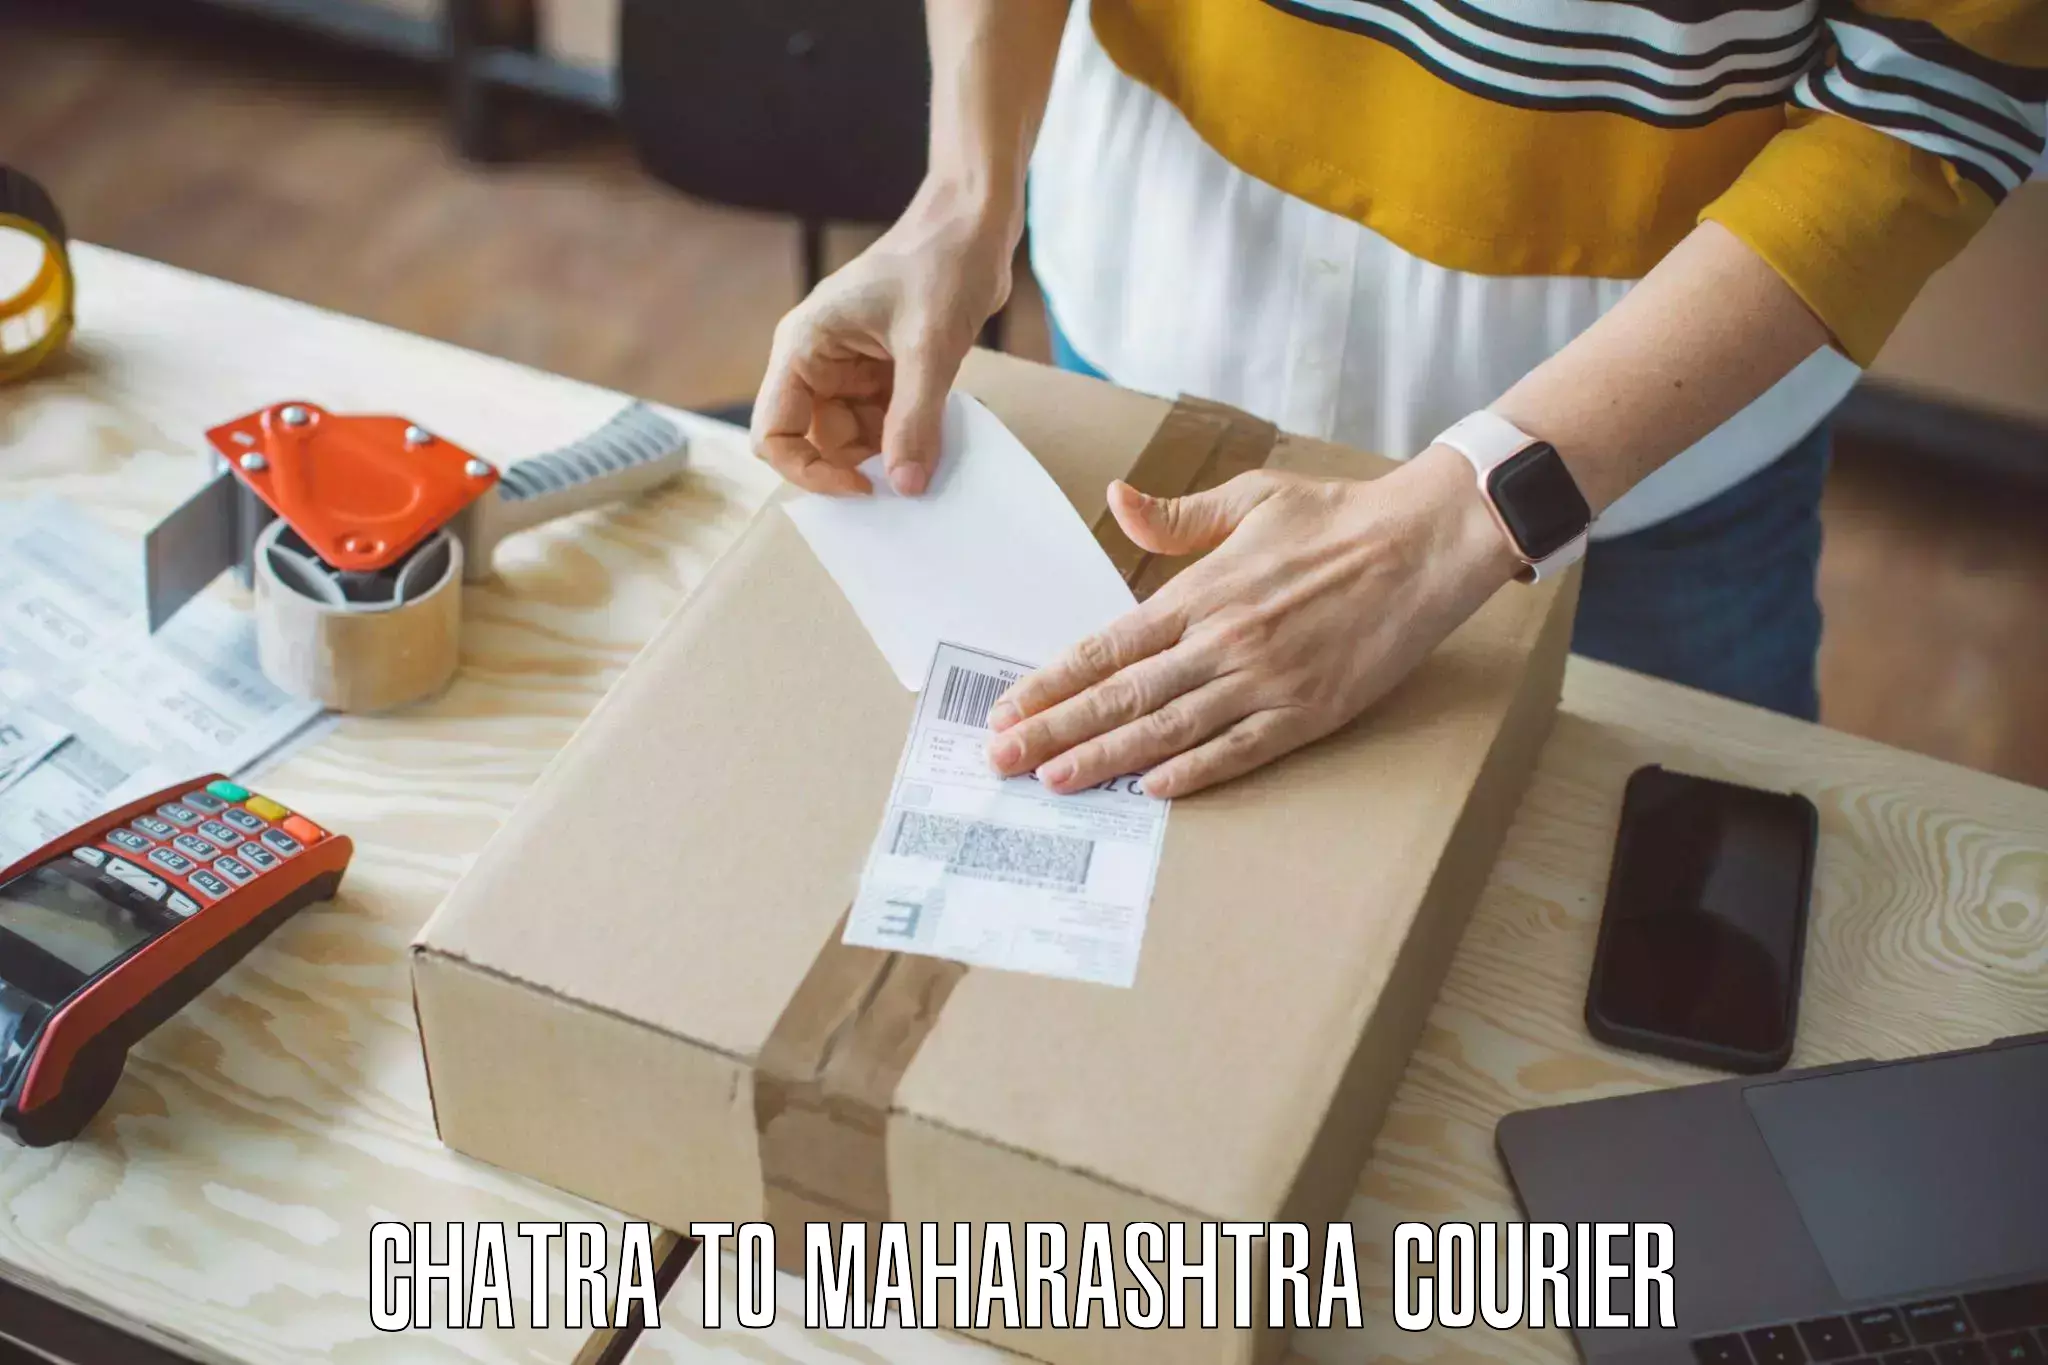 Nationwide moving services Chatra to Amravati